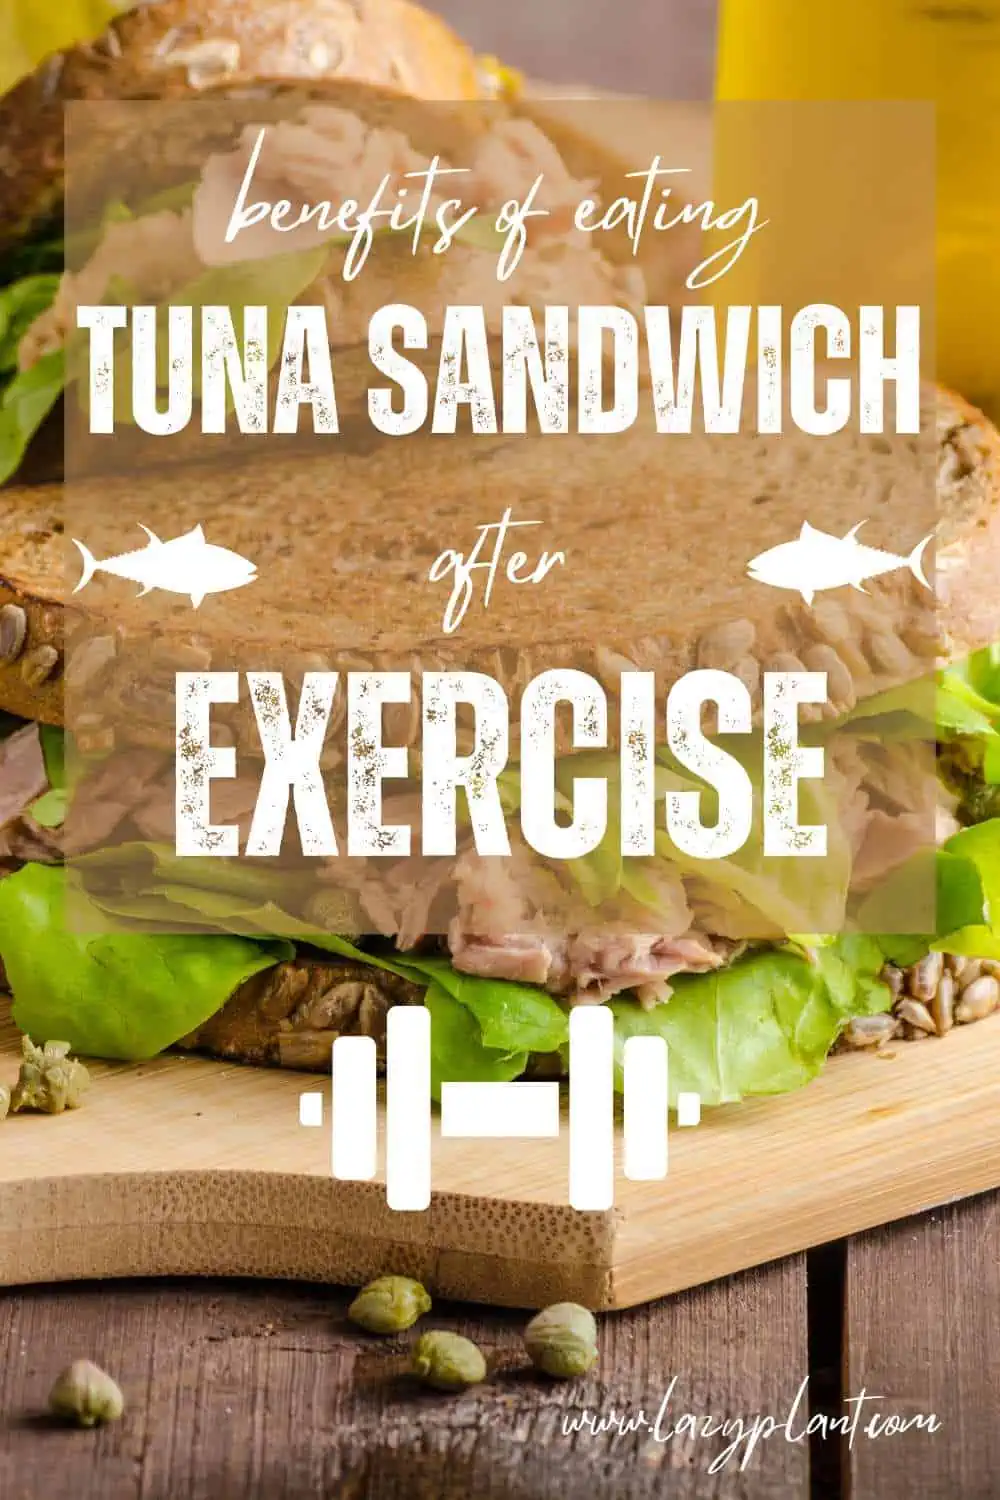 Eating a tuna sandwich after exercise supports muscle recovery!